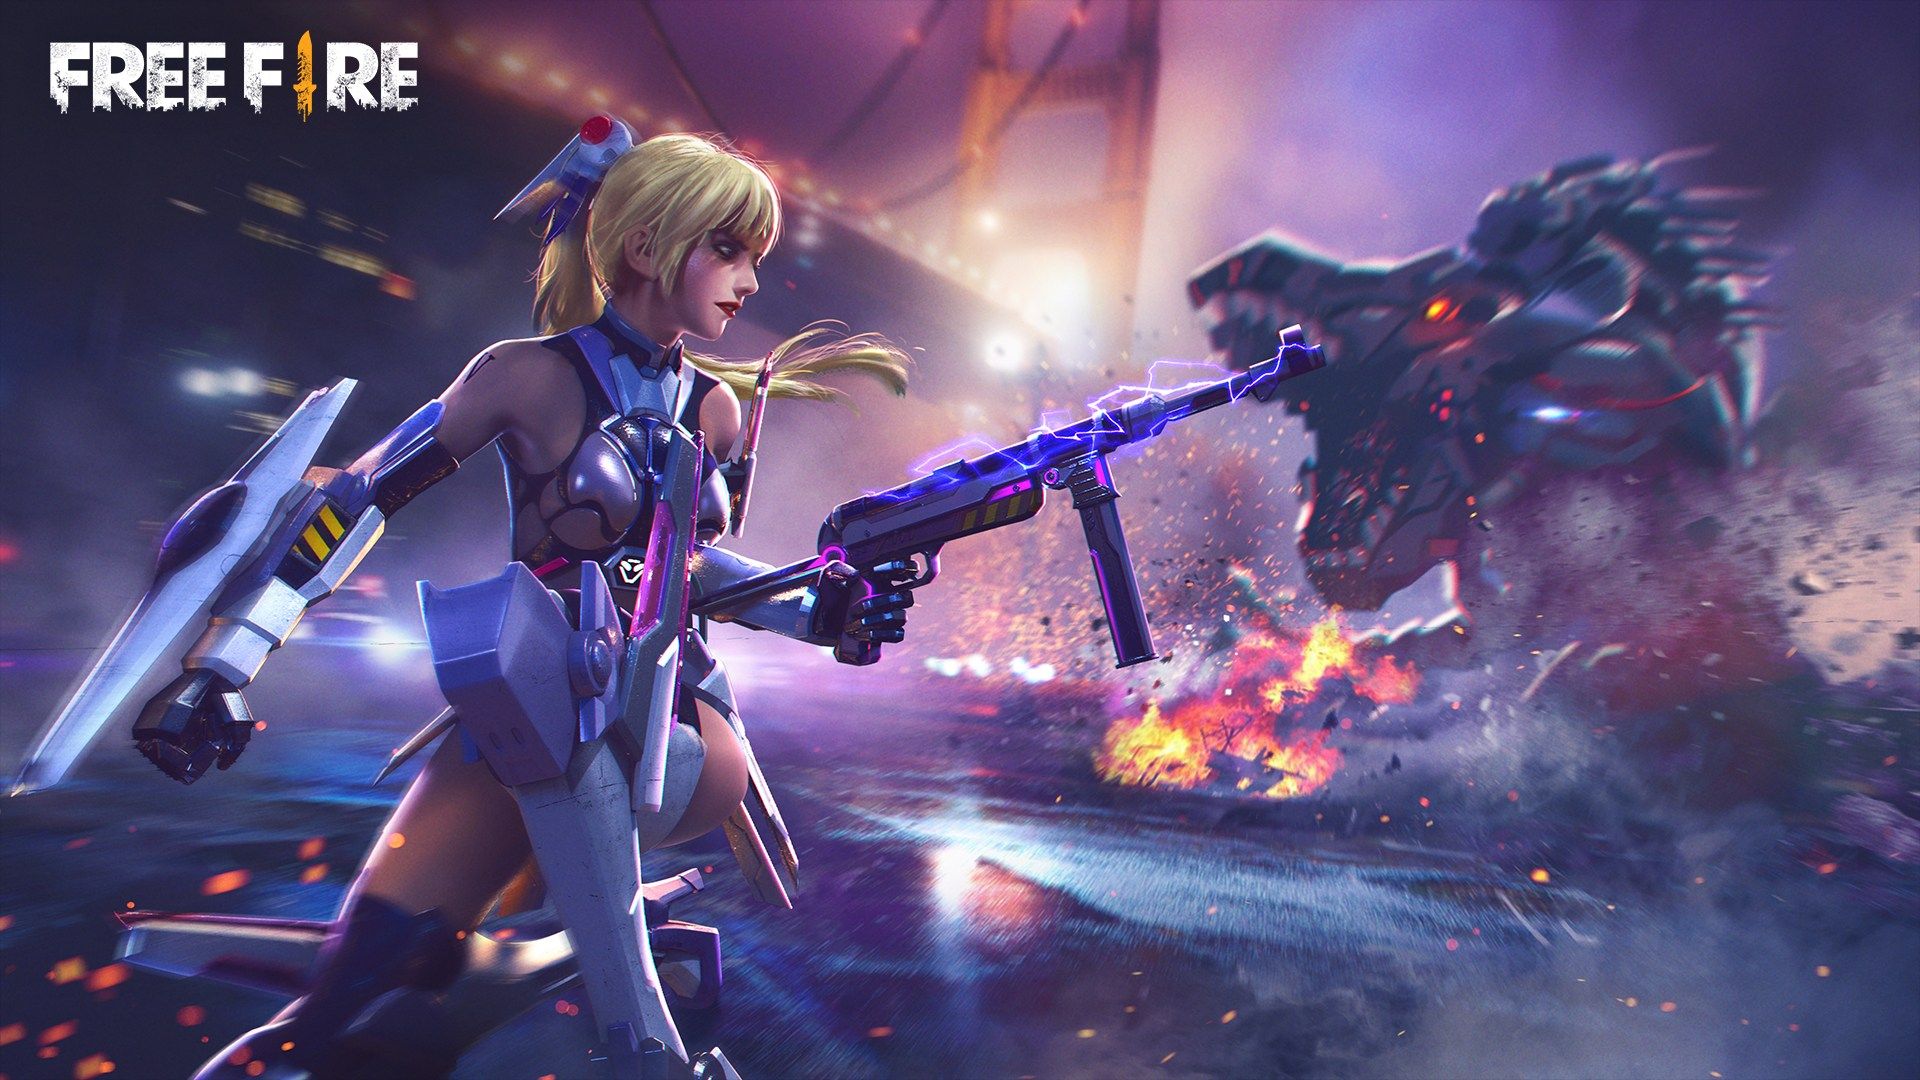 Garena Free Fire Image And Wallpaper Free Download